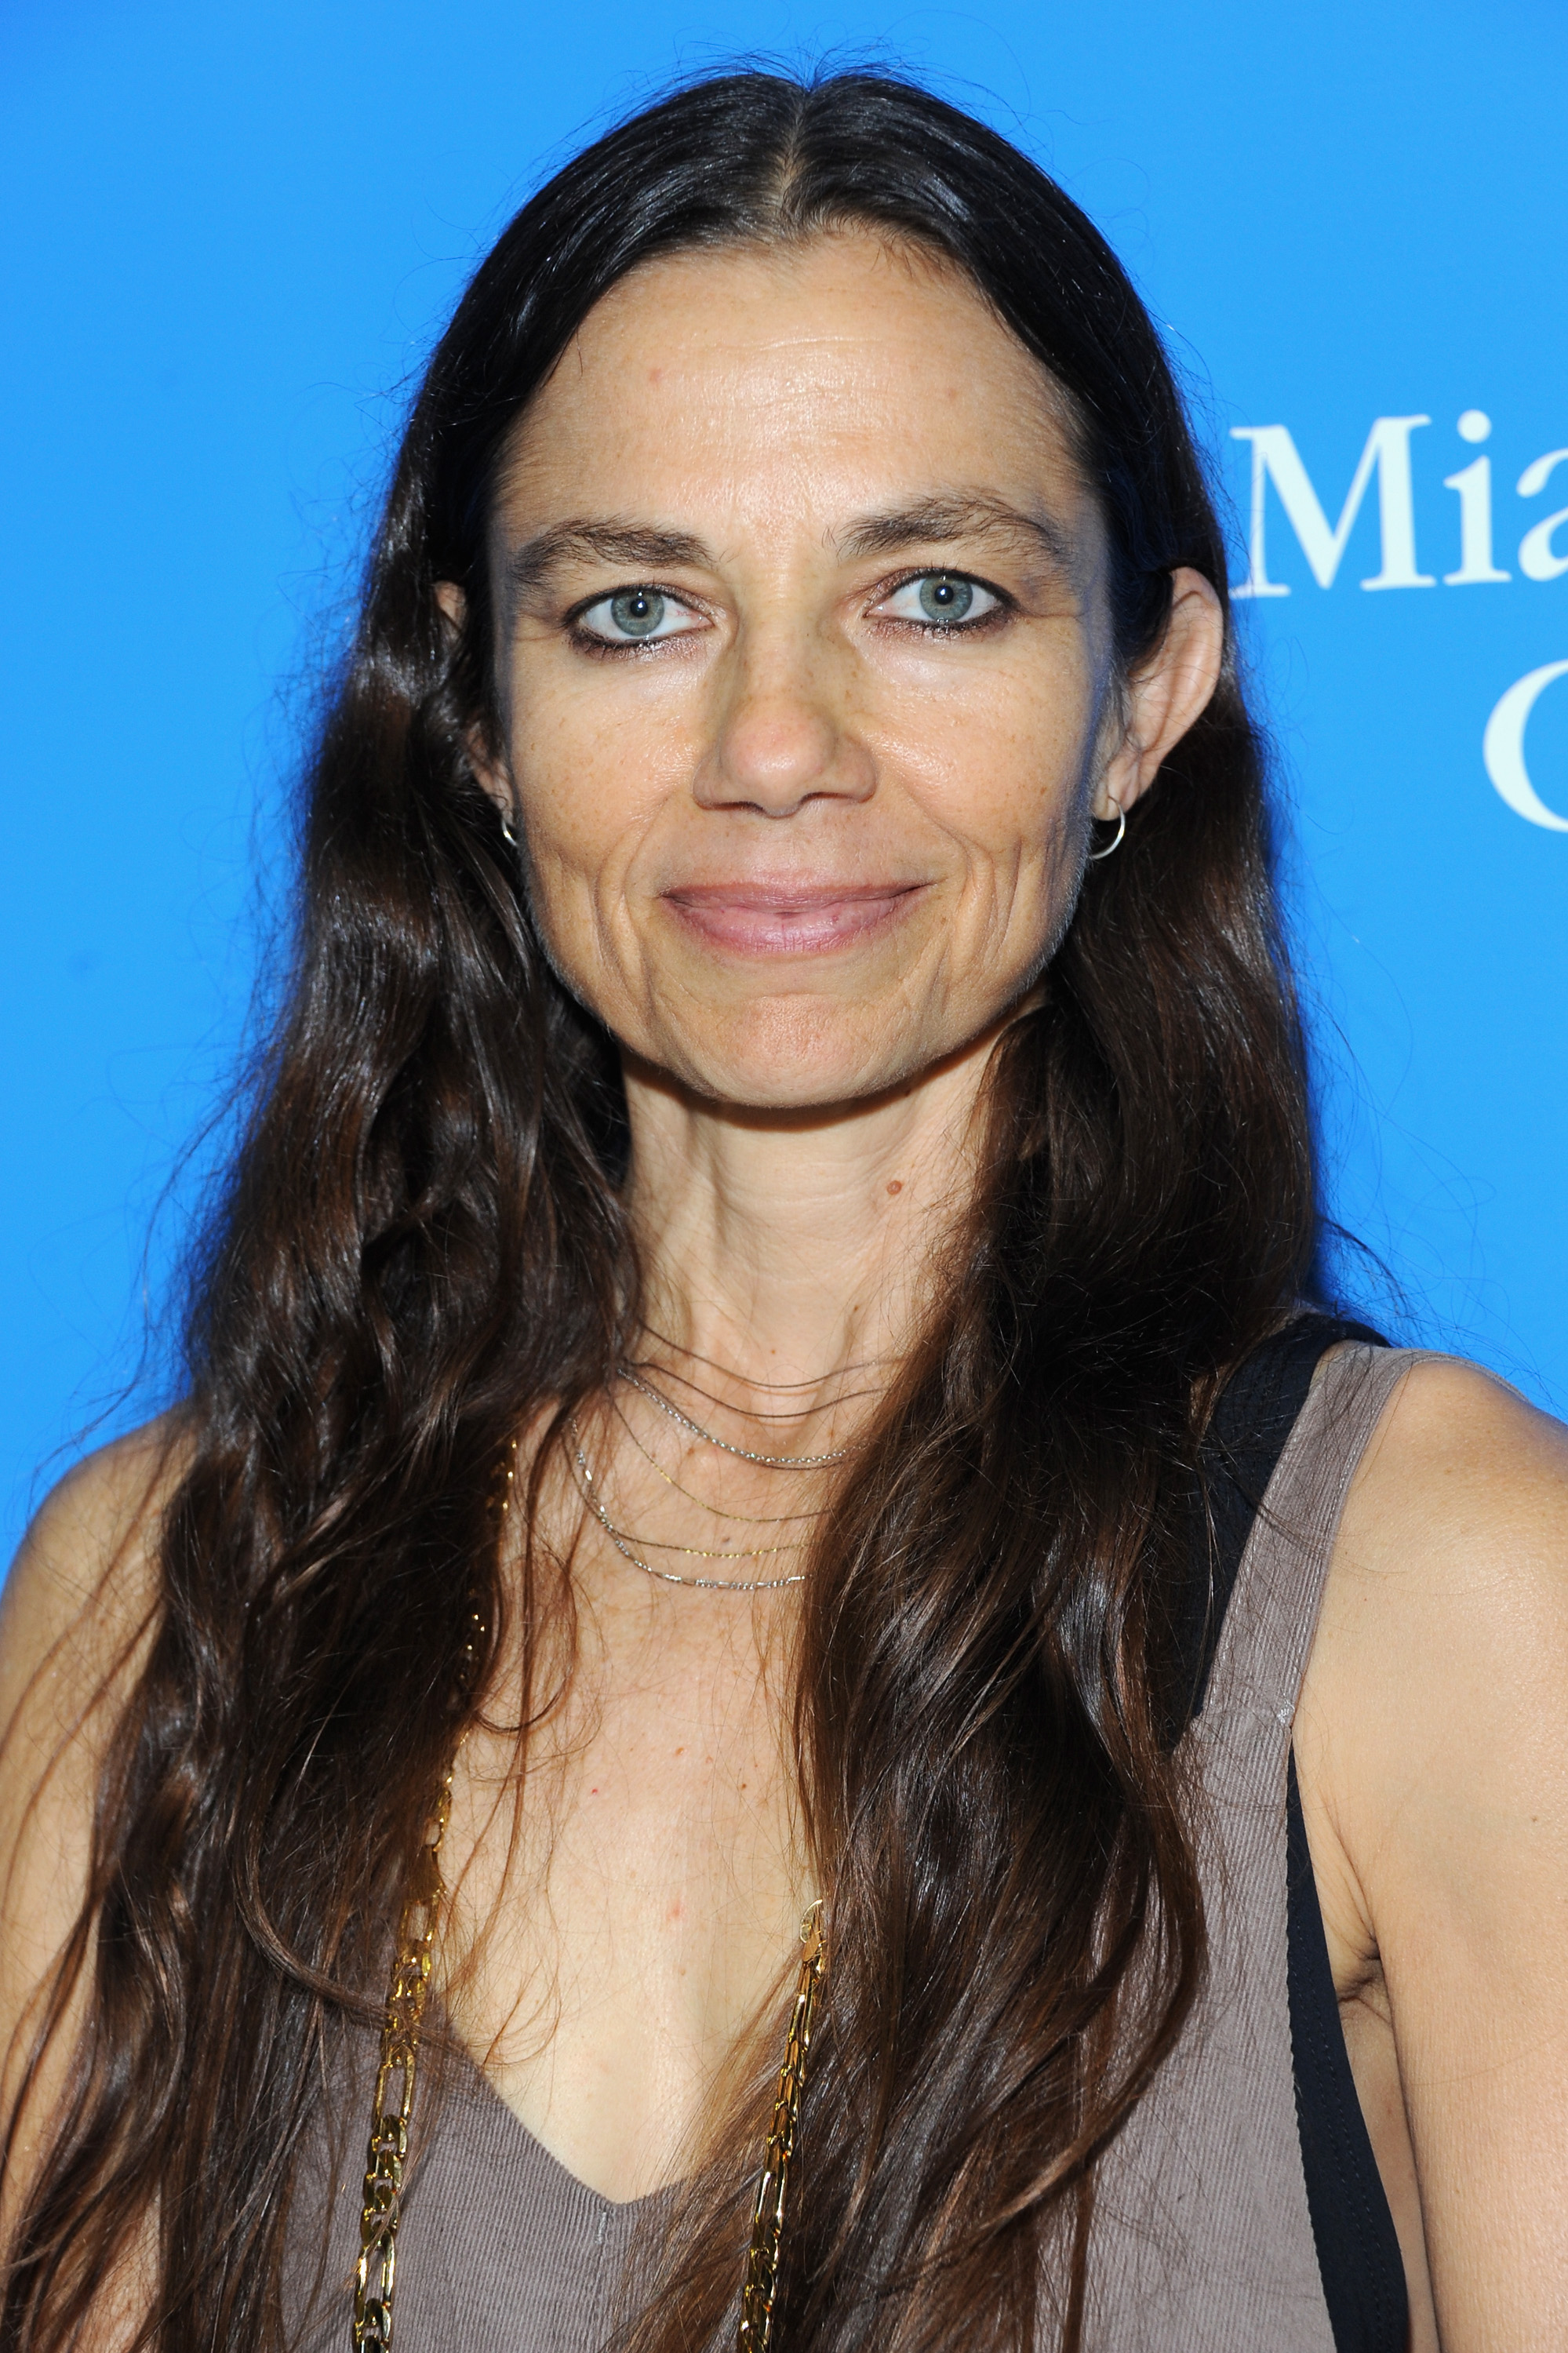 Justine Bateman attends the Miami Book Fair in 2018  | Source: Getty Images